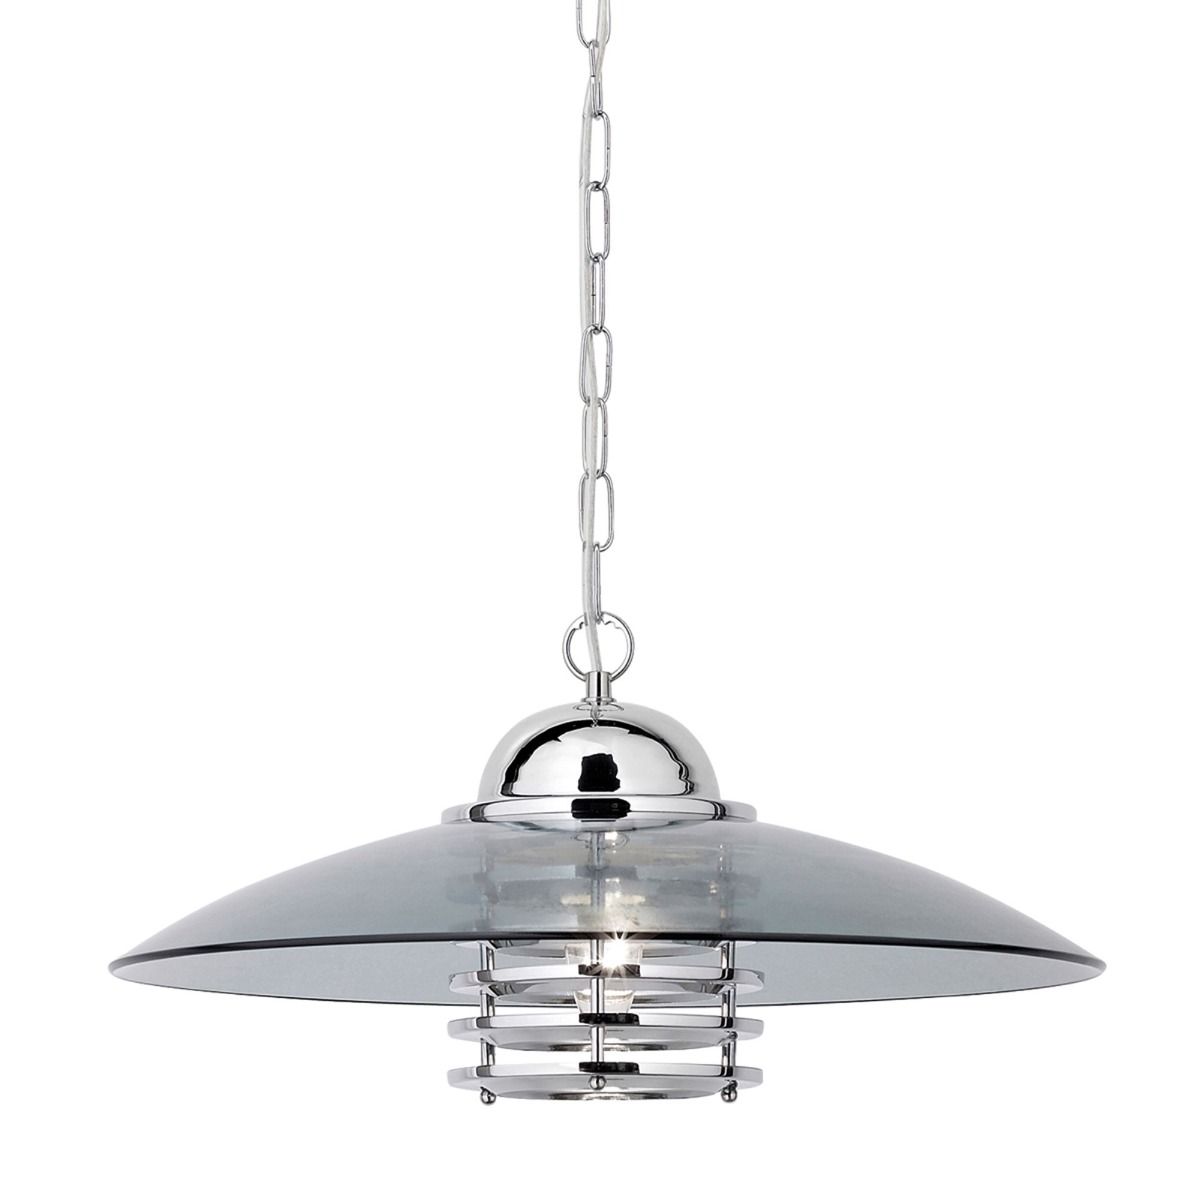 Hattie Polished Chrome Pendant Ceiling Light with Smoked Glass Shade